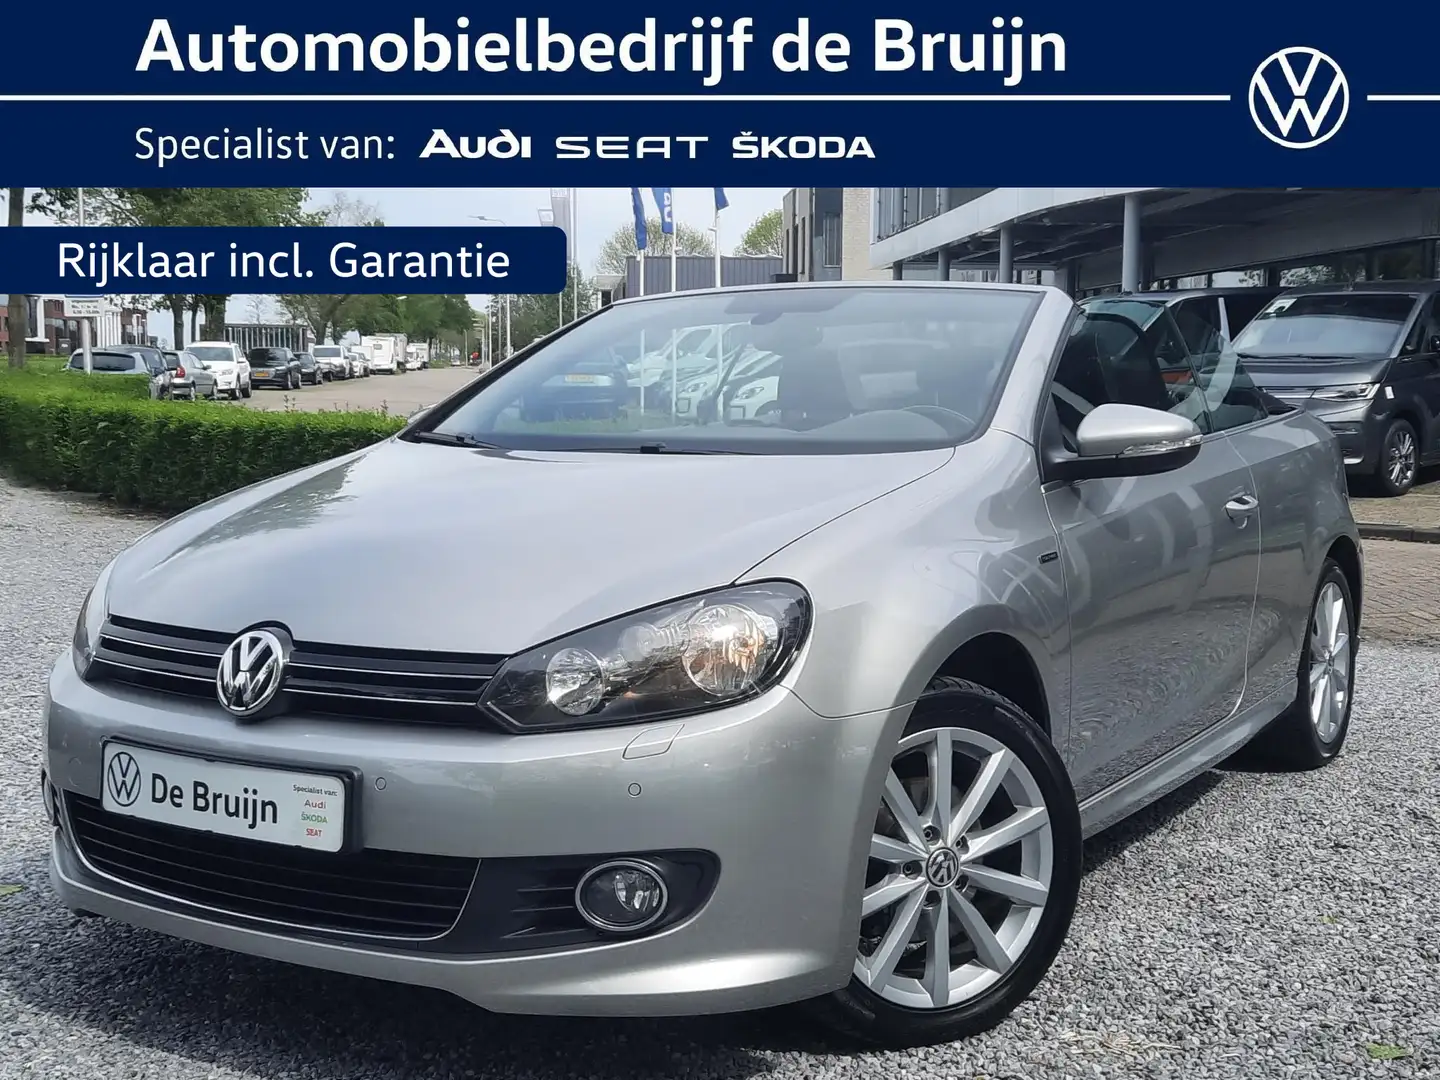 Volkswagen Golf Cabriolet 1.2 TSI 105pk Lounge (Navi,Clima,LM,Pdc,LM) Silver - 1